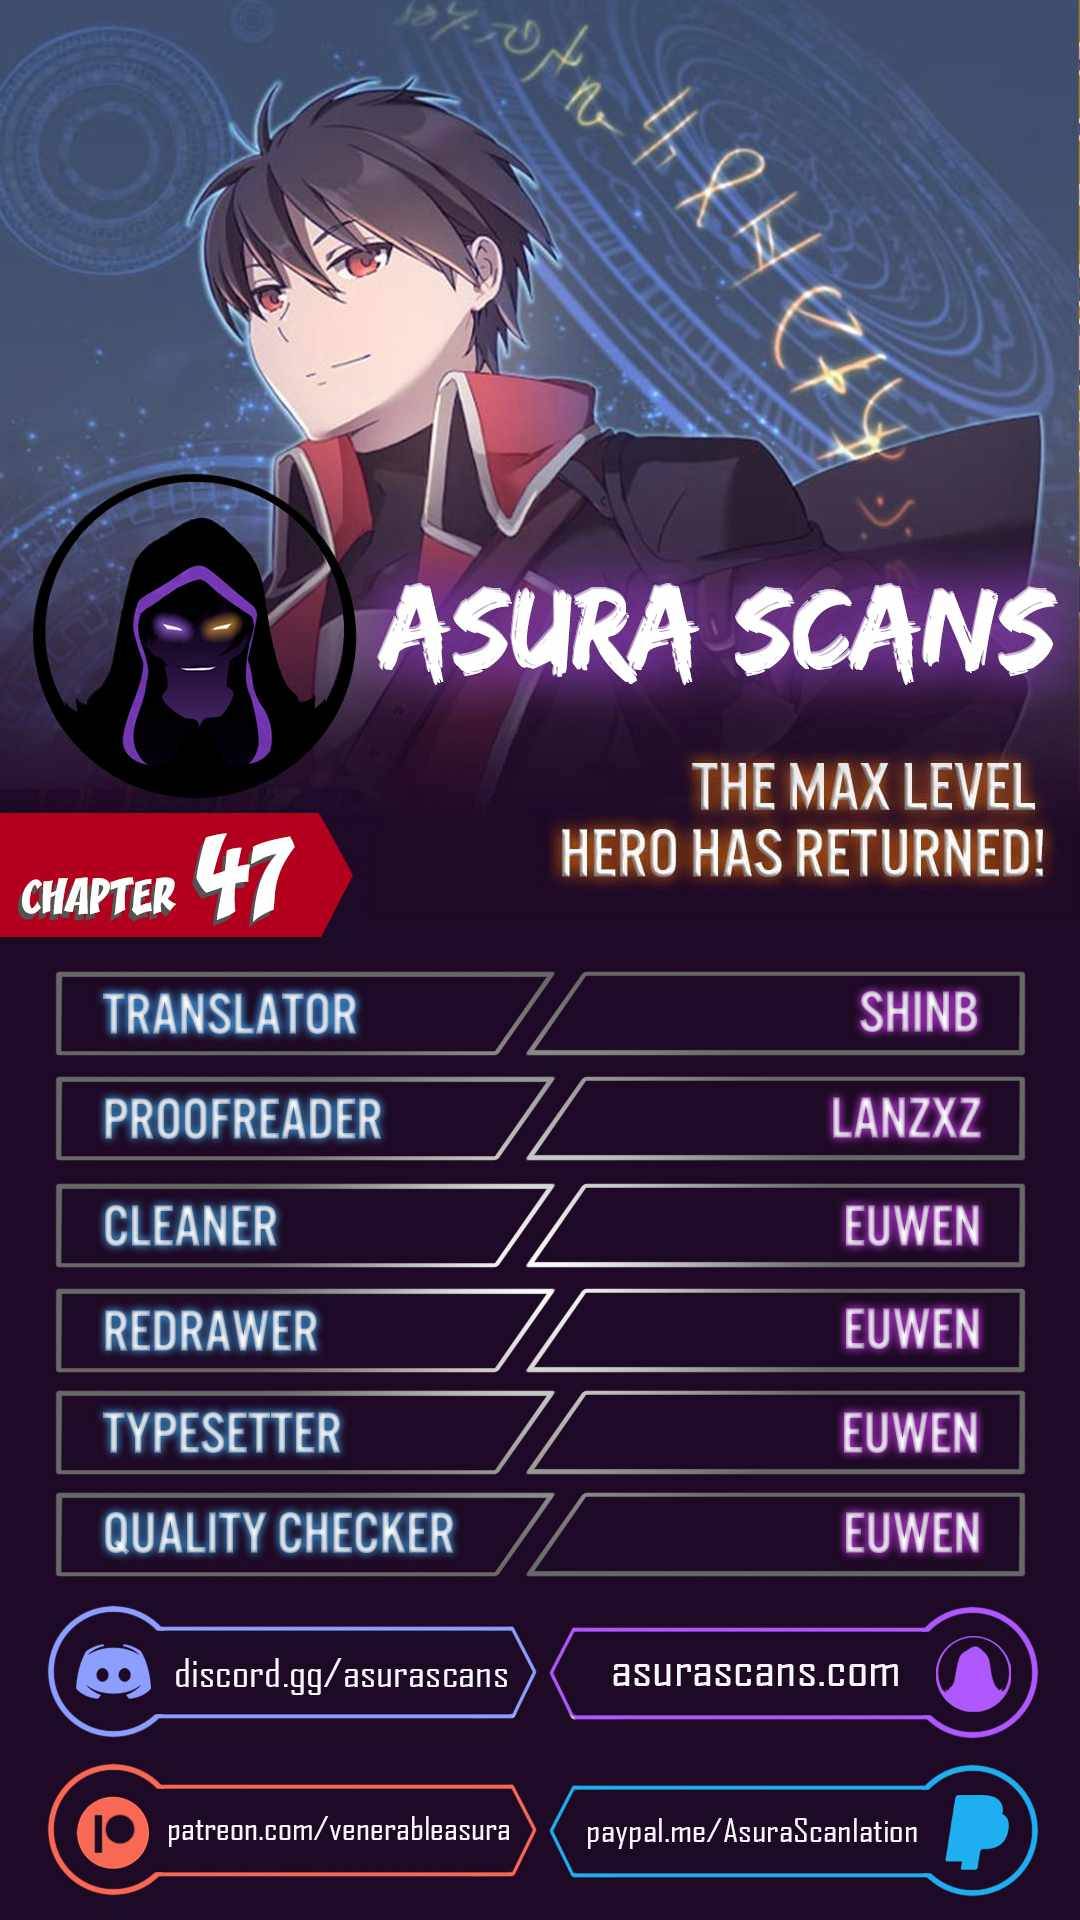 The MAX leveled hero will return! Chapter 47